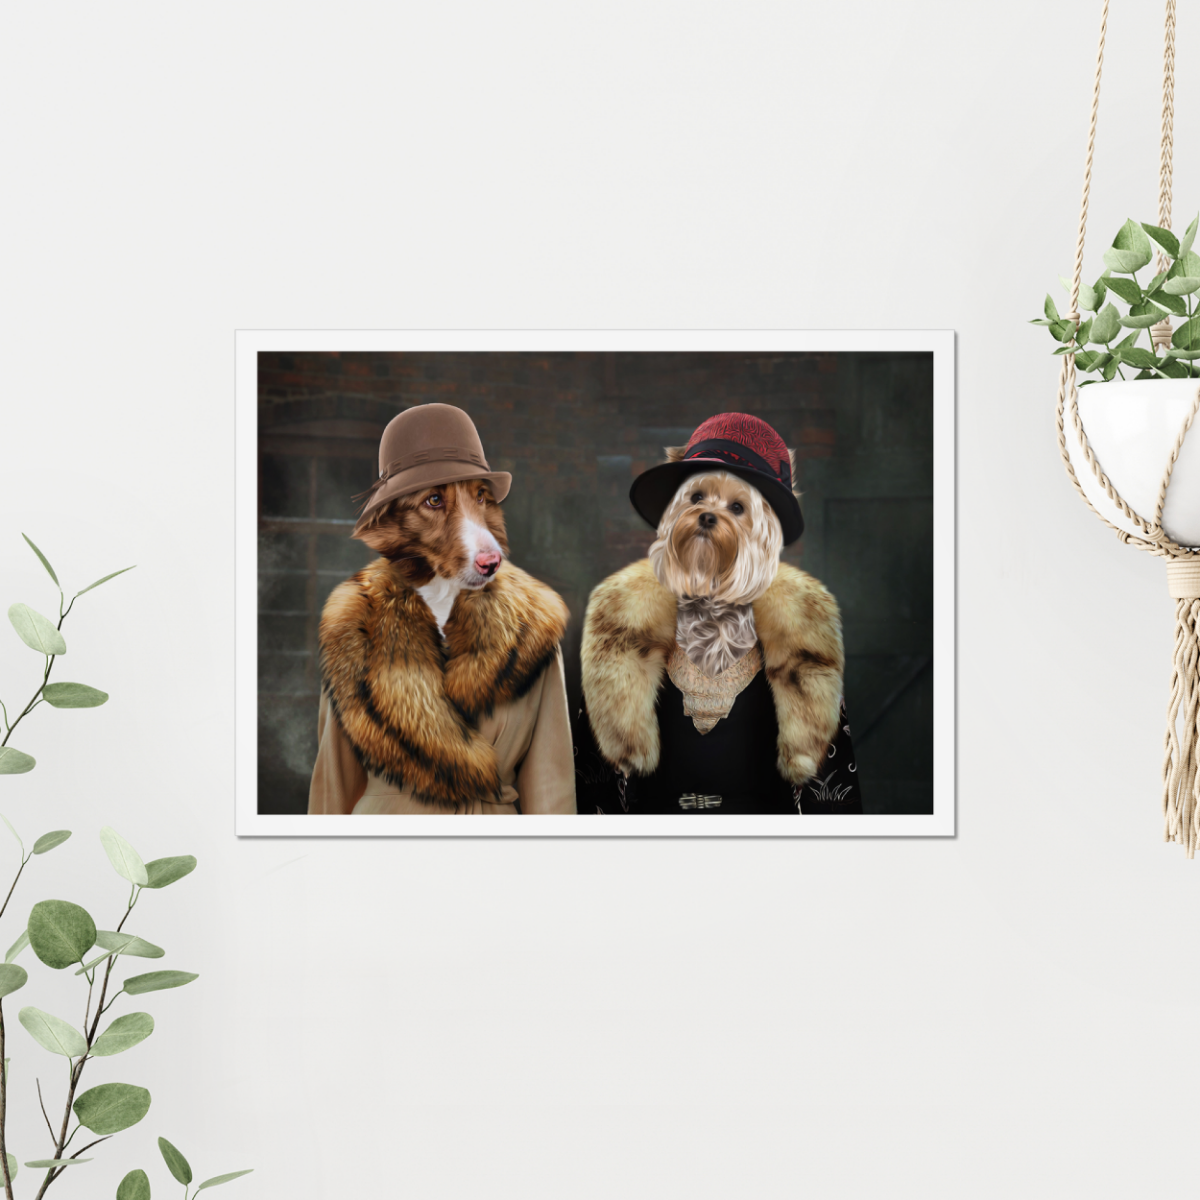 The Women (Peaky Blinders Inspired) 2 Pet: Custom Pet Poster - Paw & Glory - #pet portraits# - #dog portraits# - #pet portraits uk#Paw & Glory, pawandglory, dog portrait background colors, dog astronaut photo, best dog artists, dog astronaut photo, dog drawing from photo, dog portrait images, pet portrait